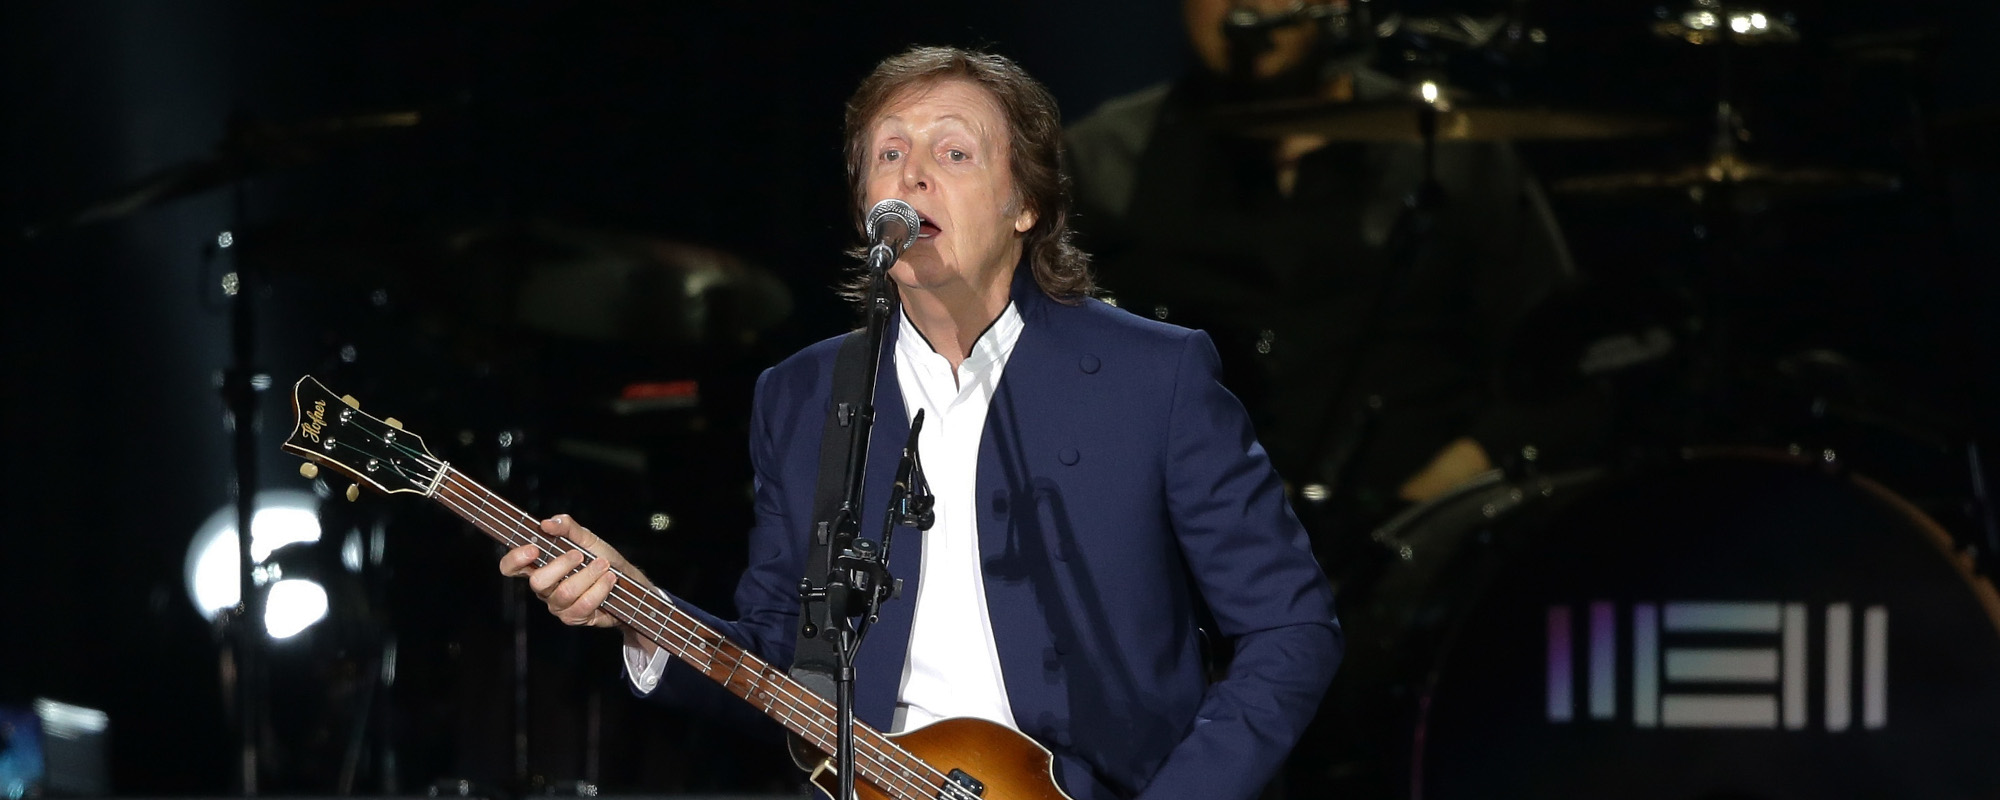 Remember When: Paul McCartney Disbands Wings and Makes ‘Tug of War’